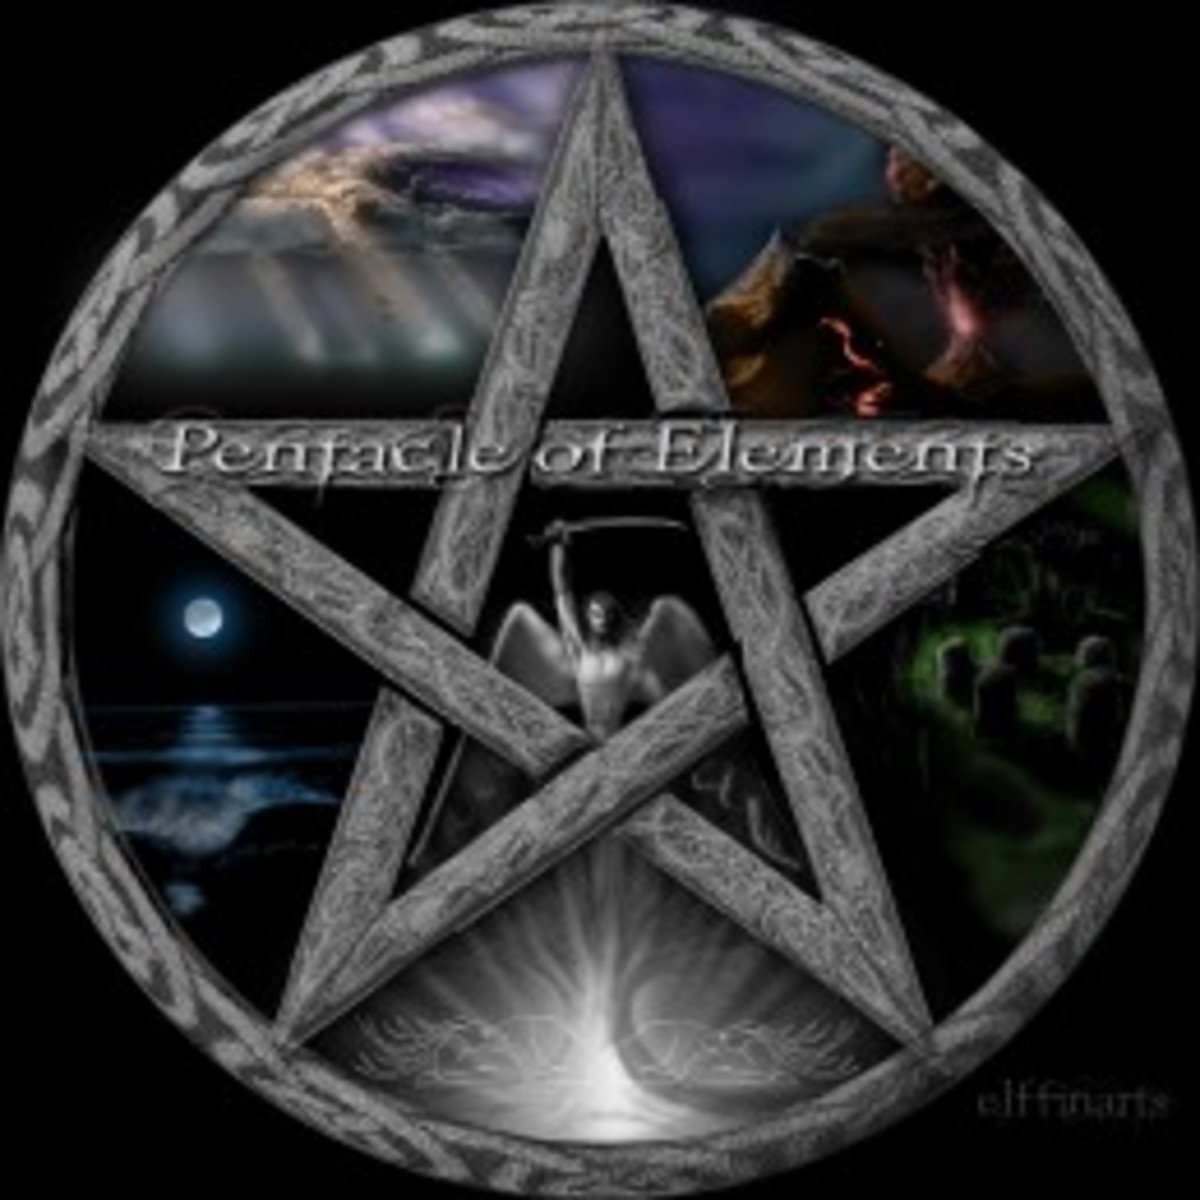 witchcraft-part-2-types-of-witches-terminology-decoded-symbols-and-more